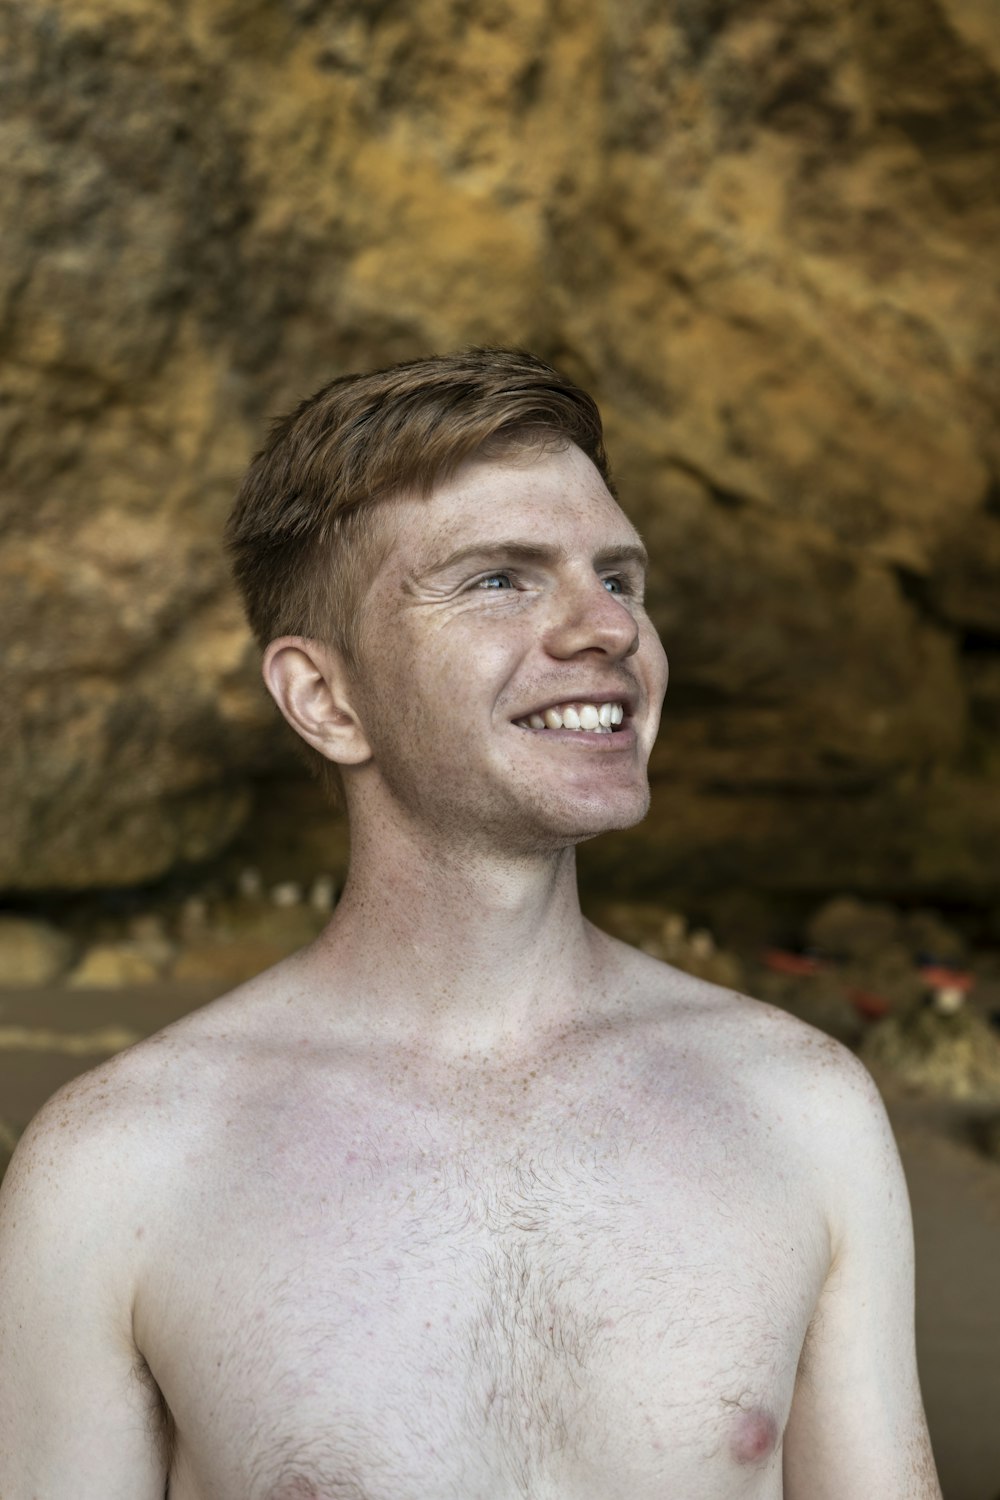 topless man smiling near brown rock formation during daytime